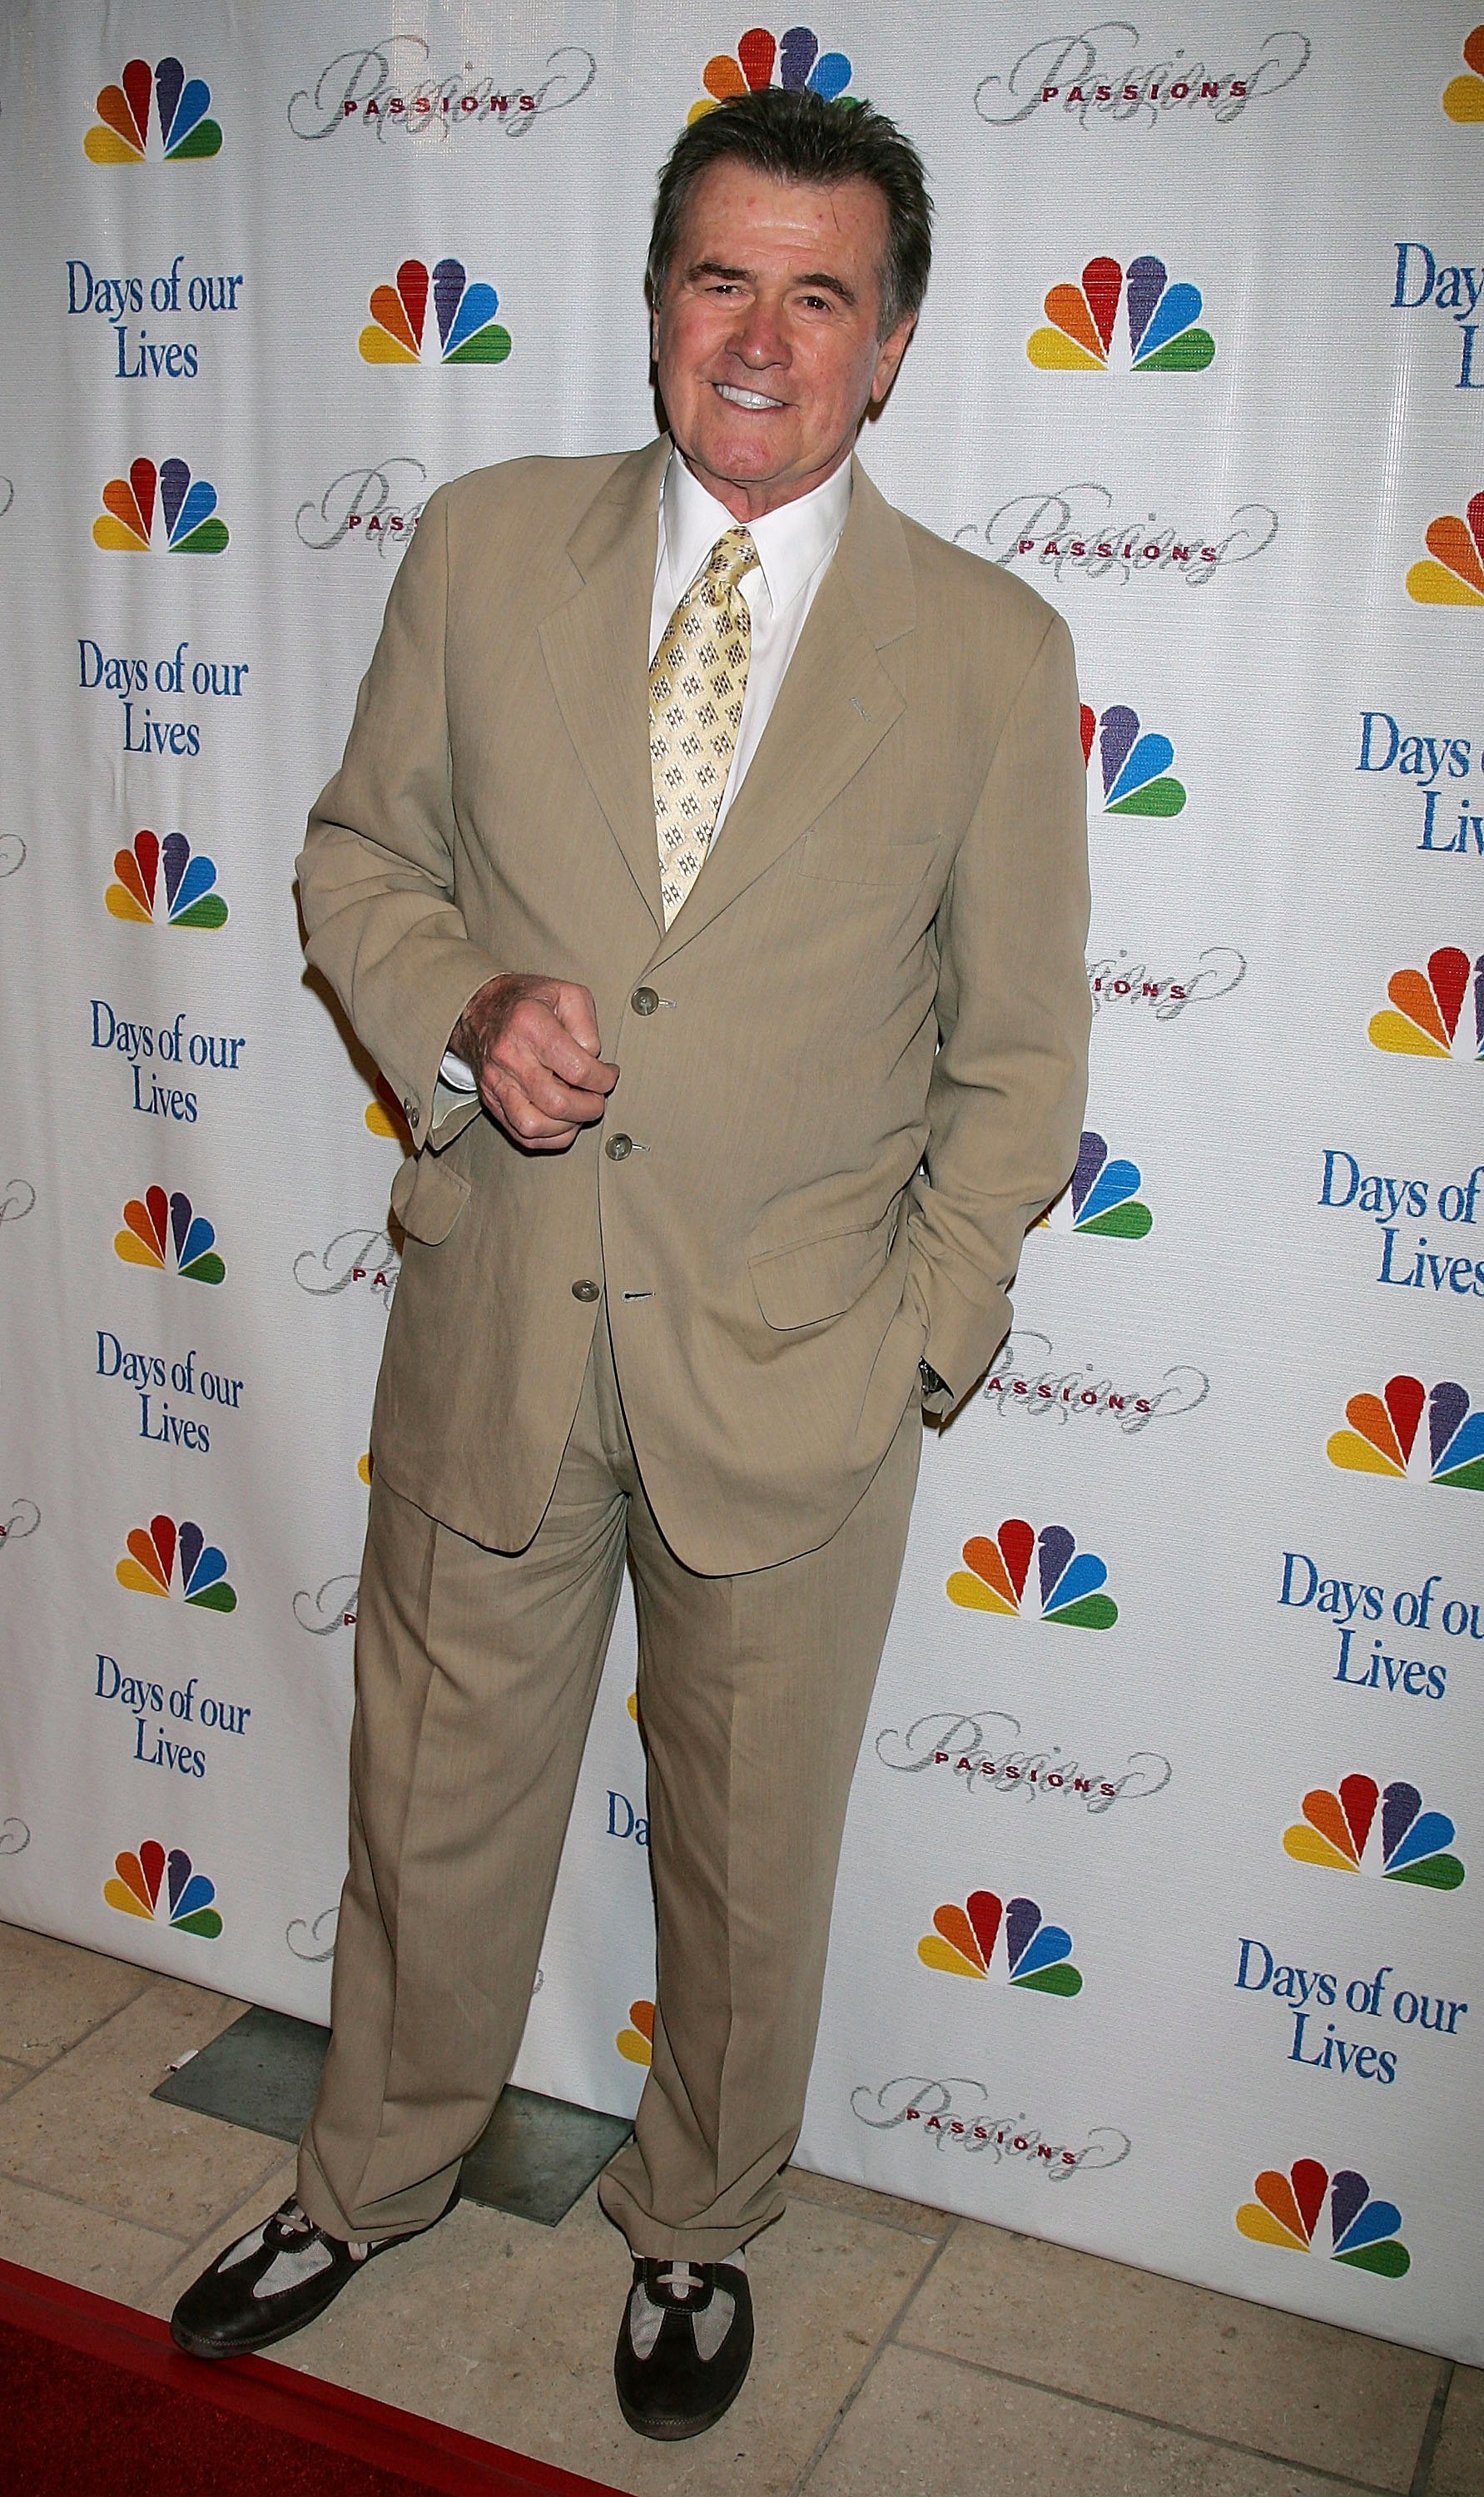 John Reilly attends NBC's "Days of Our Lives" and "Passions" pre-Emmy party on April 27, 2006 in Burbank, California. | Source: Getty Images.